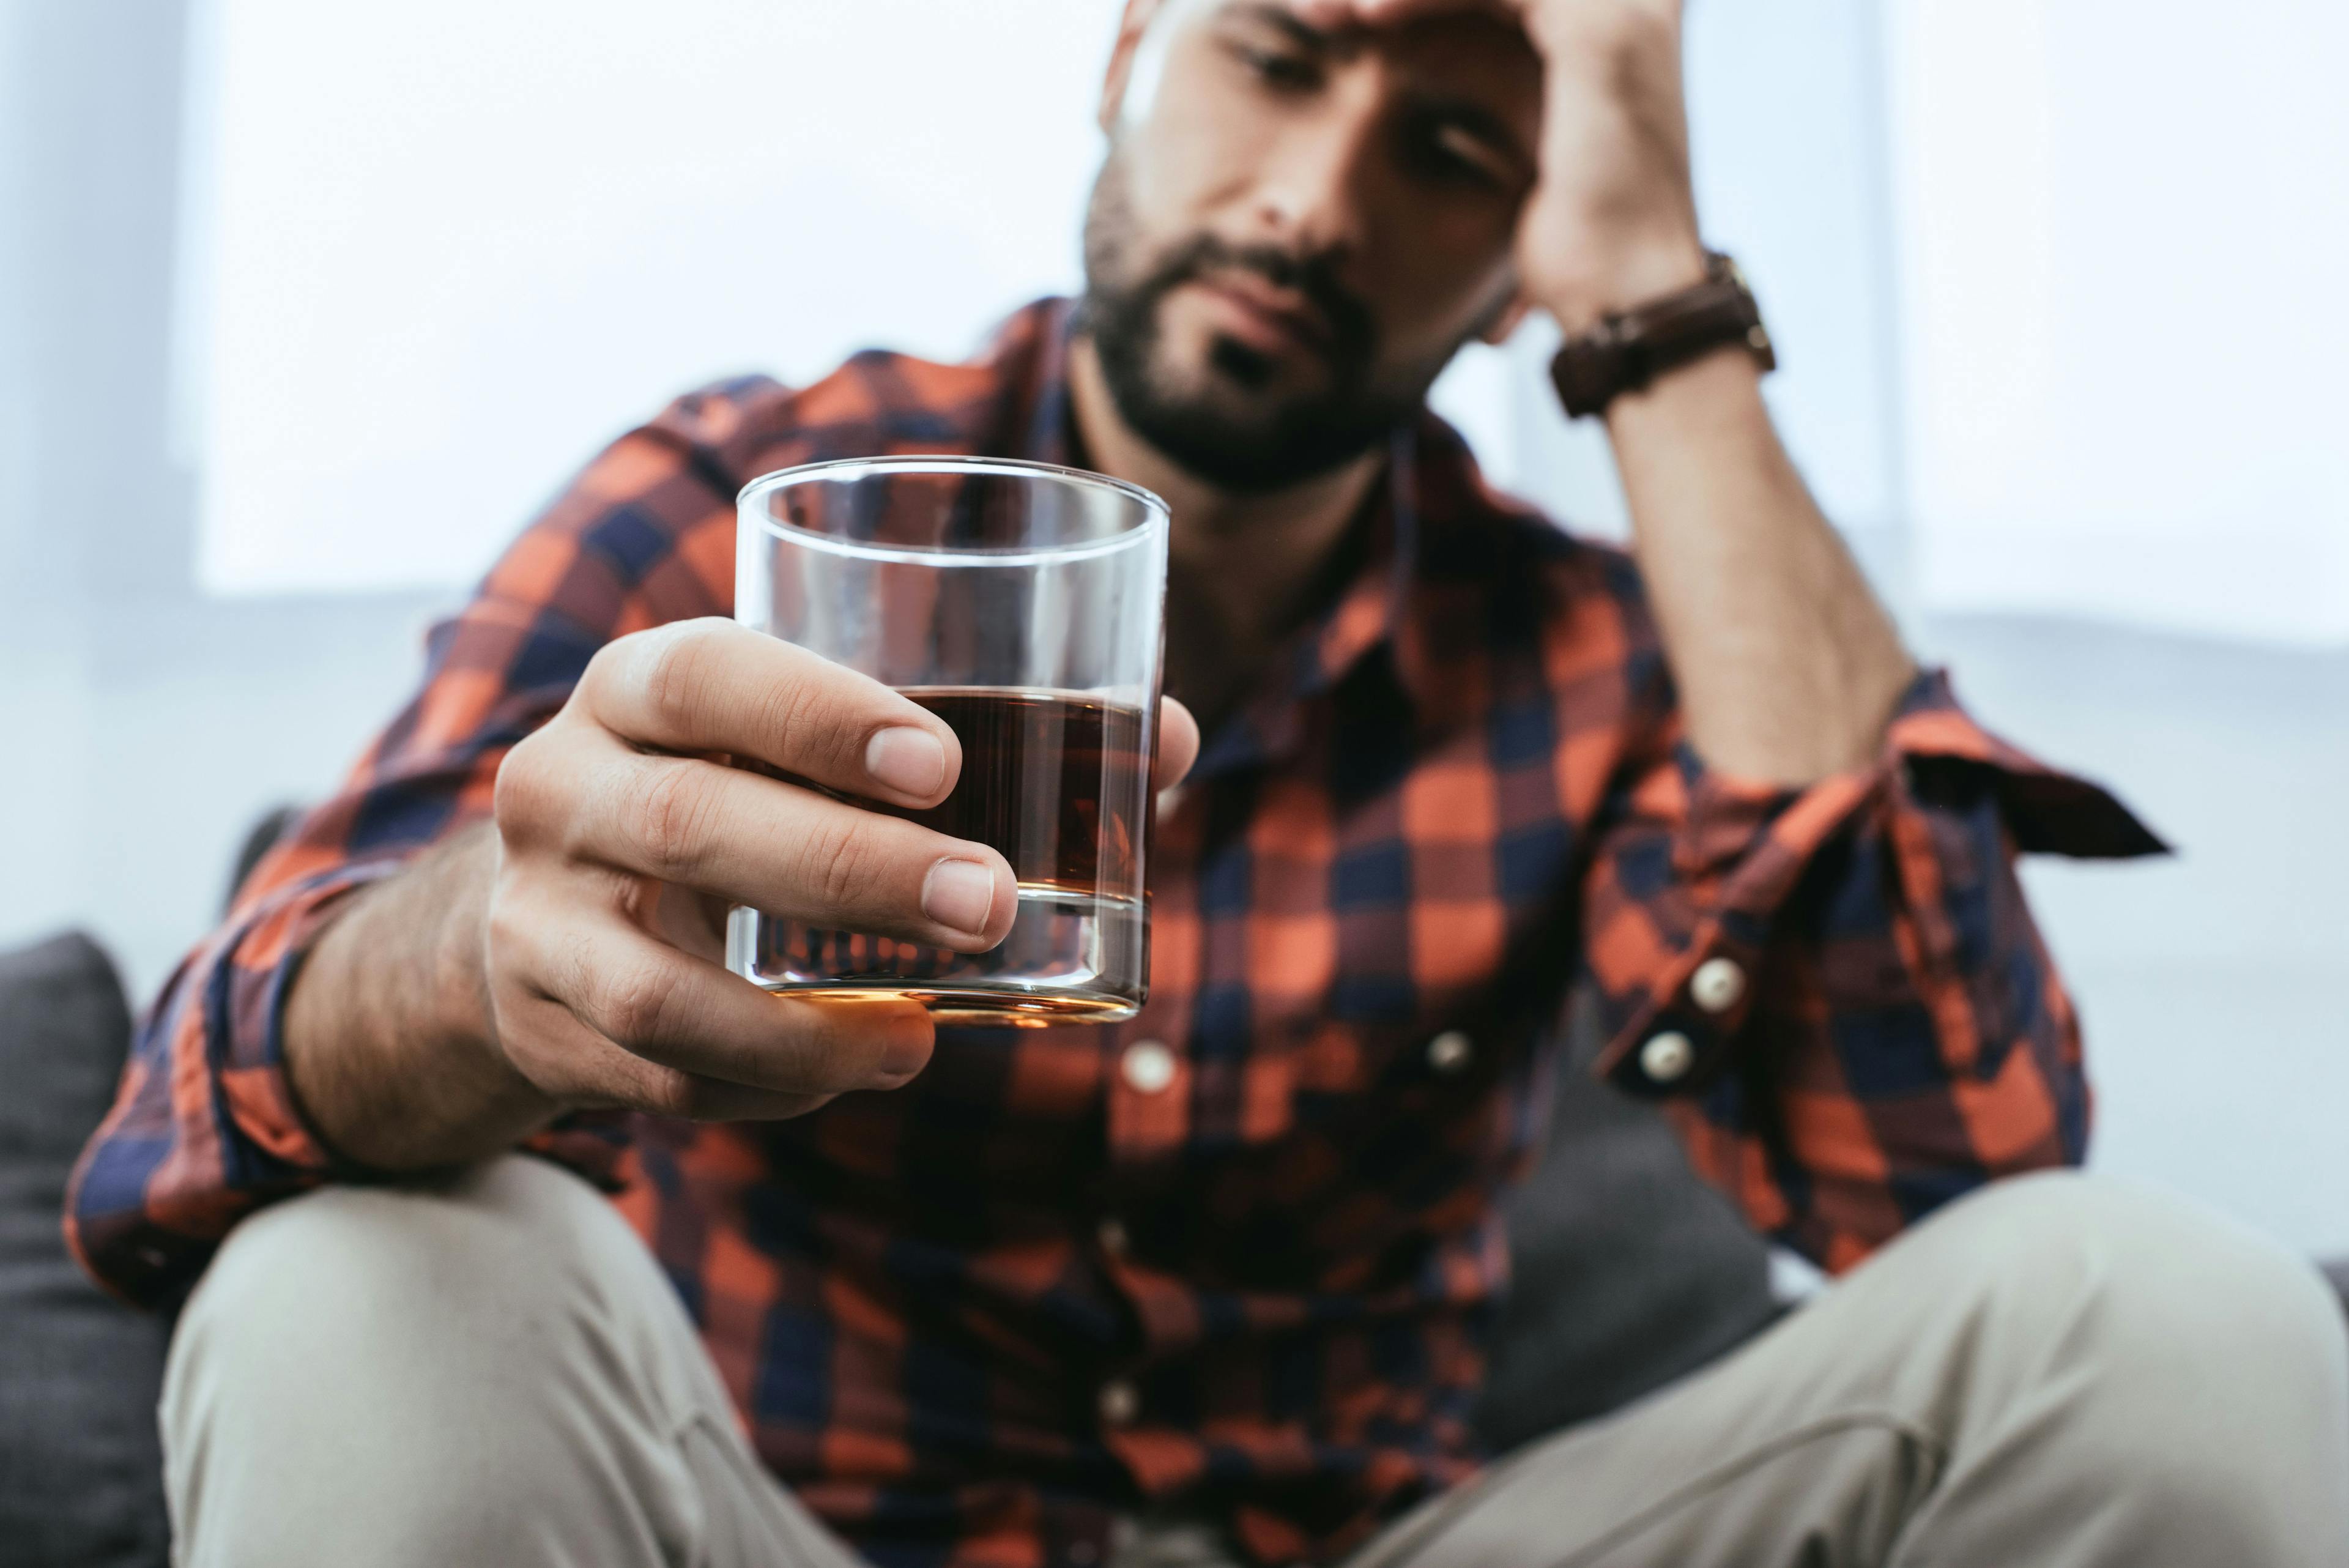 Which is the best recommendation for the treatment of alcohol use disorder?